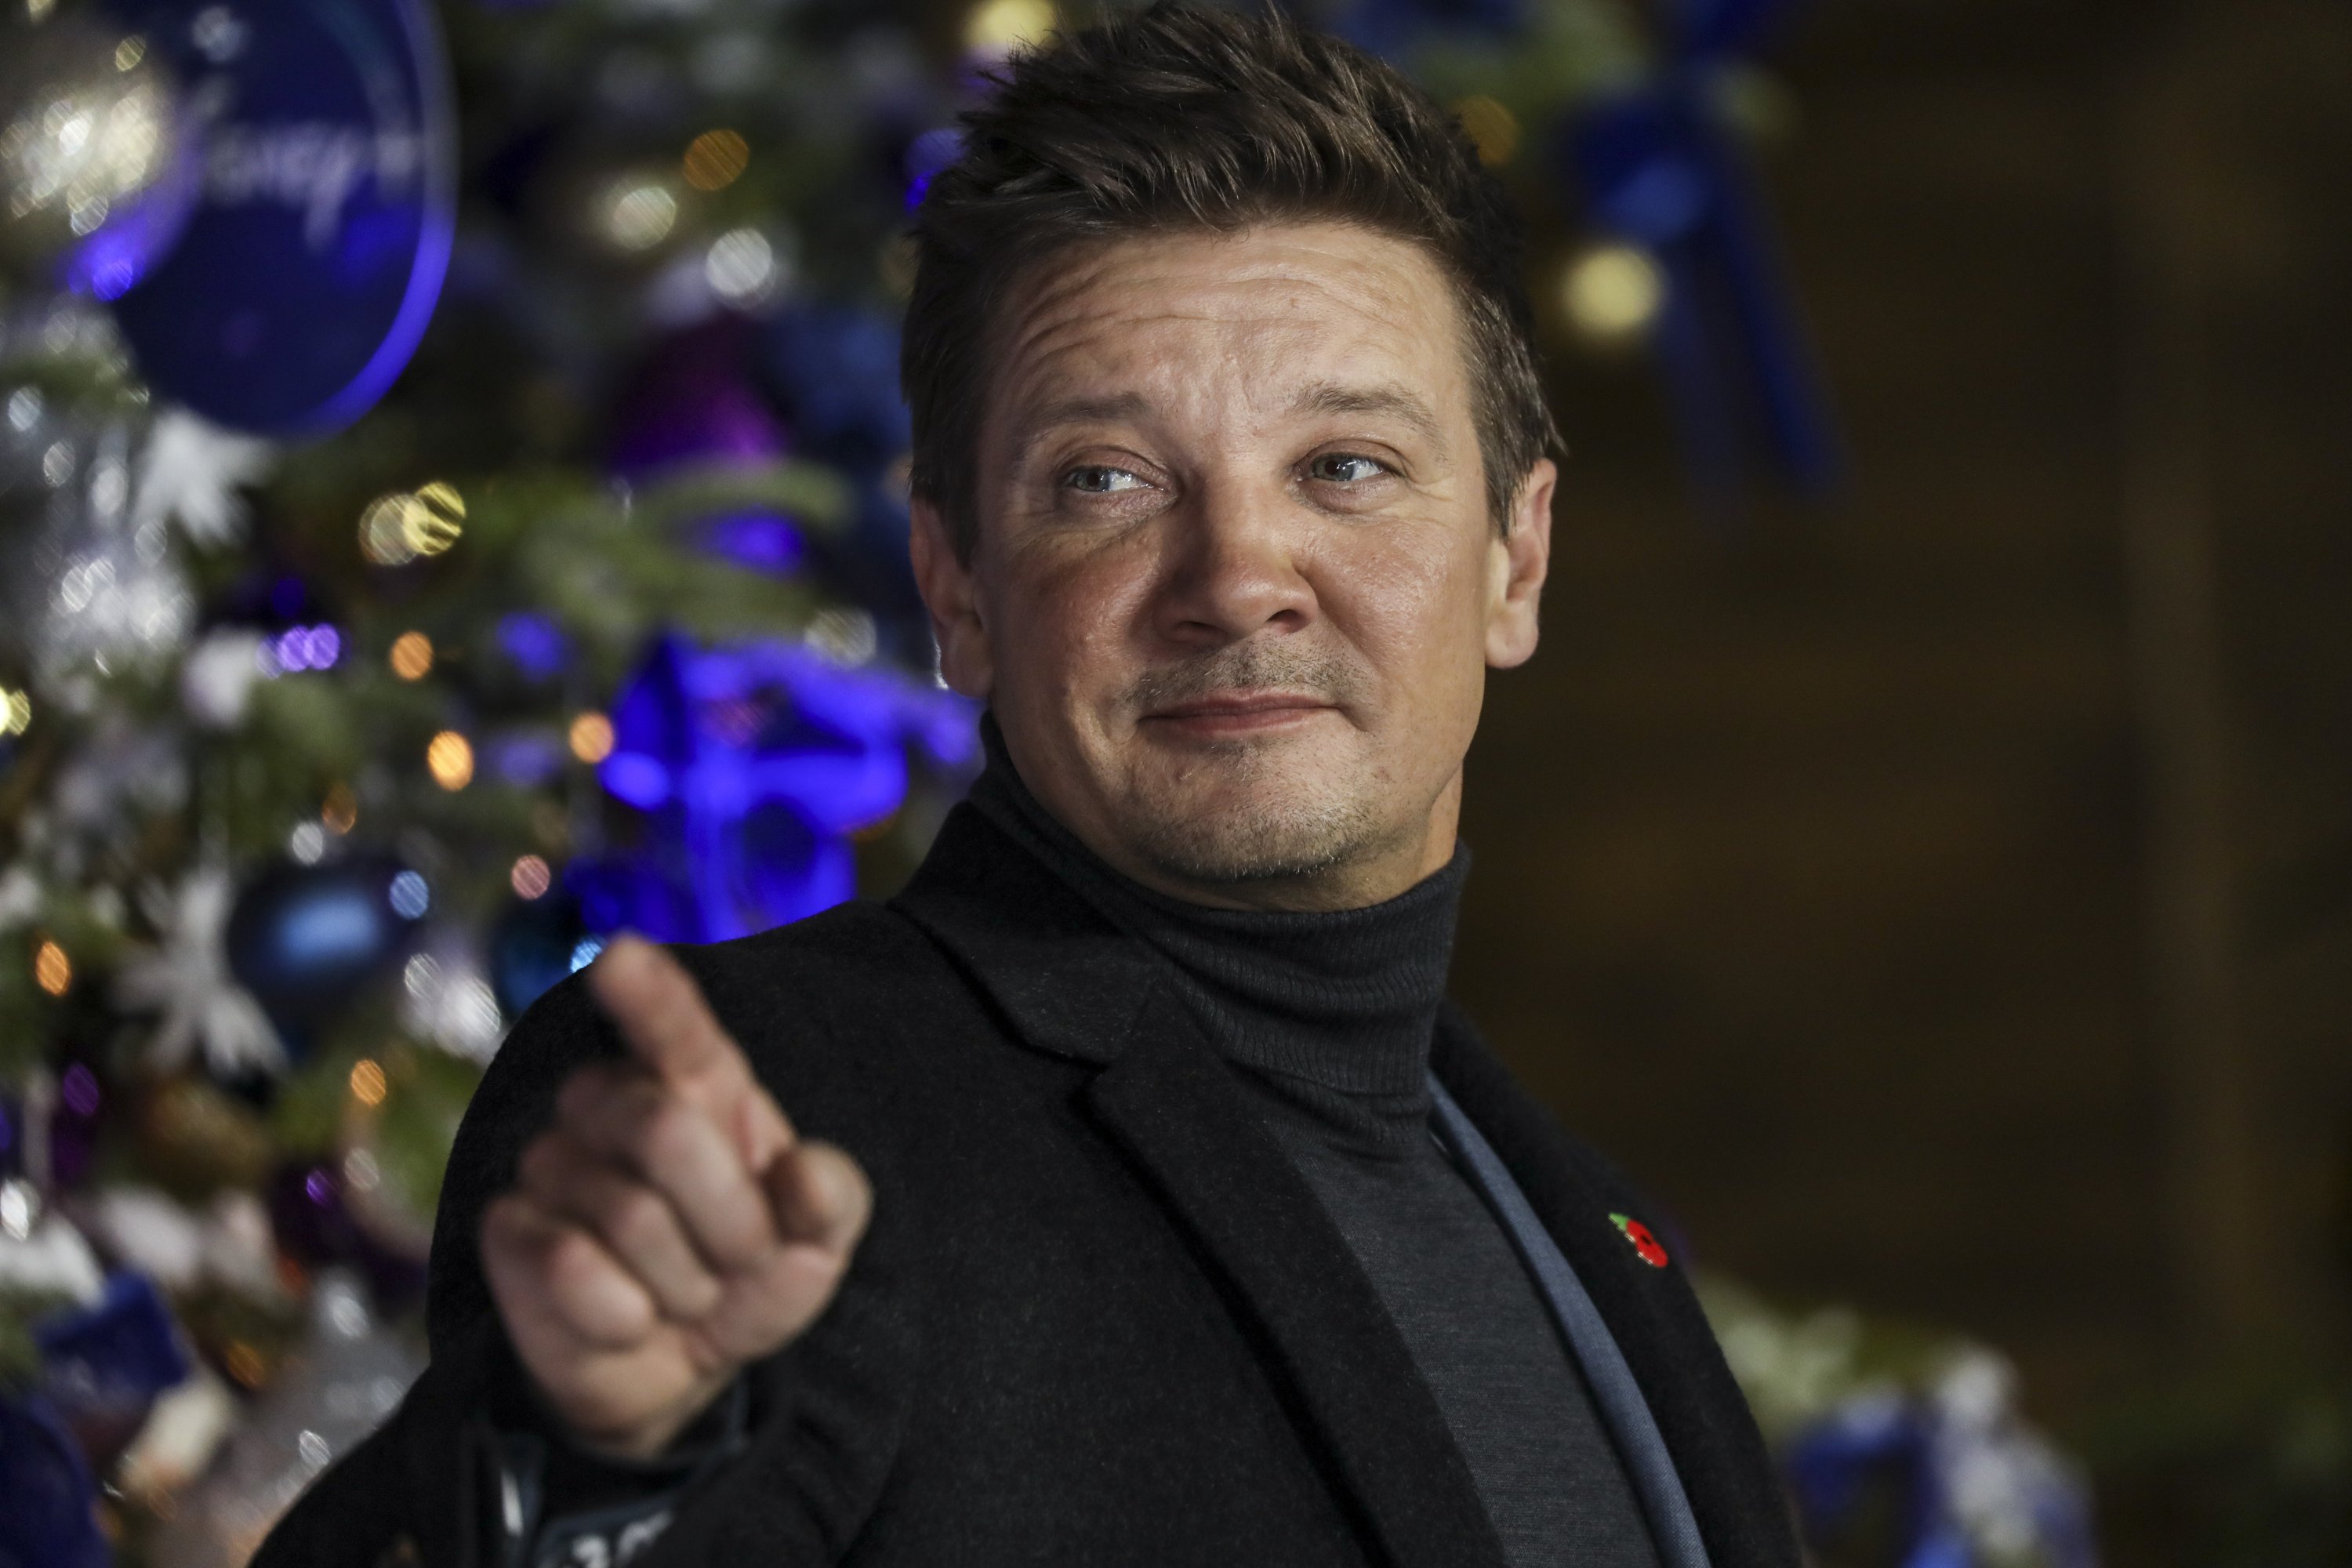 Jeremy Renner poses for photographers upon arrival at the U.K. Fan Screening of the film 'Hawkeye' in London, Nov. 11, 2021. (AP)